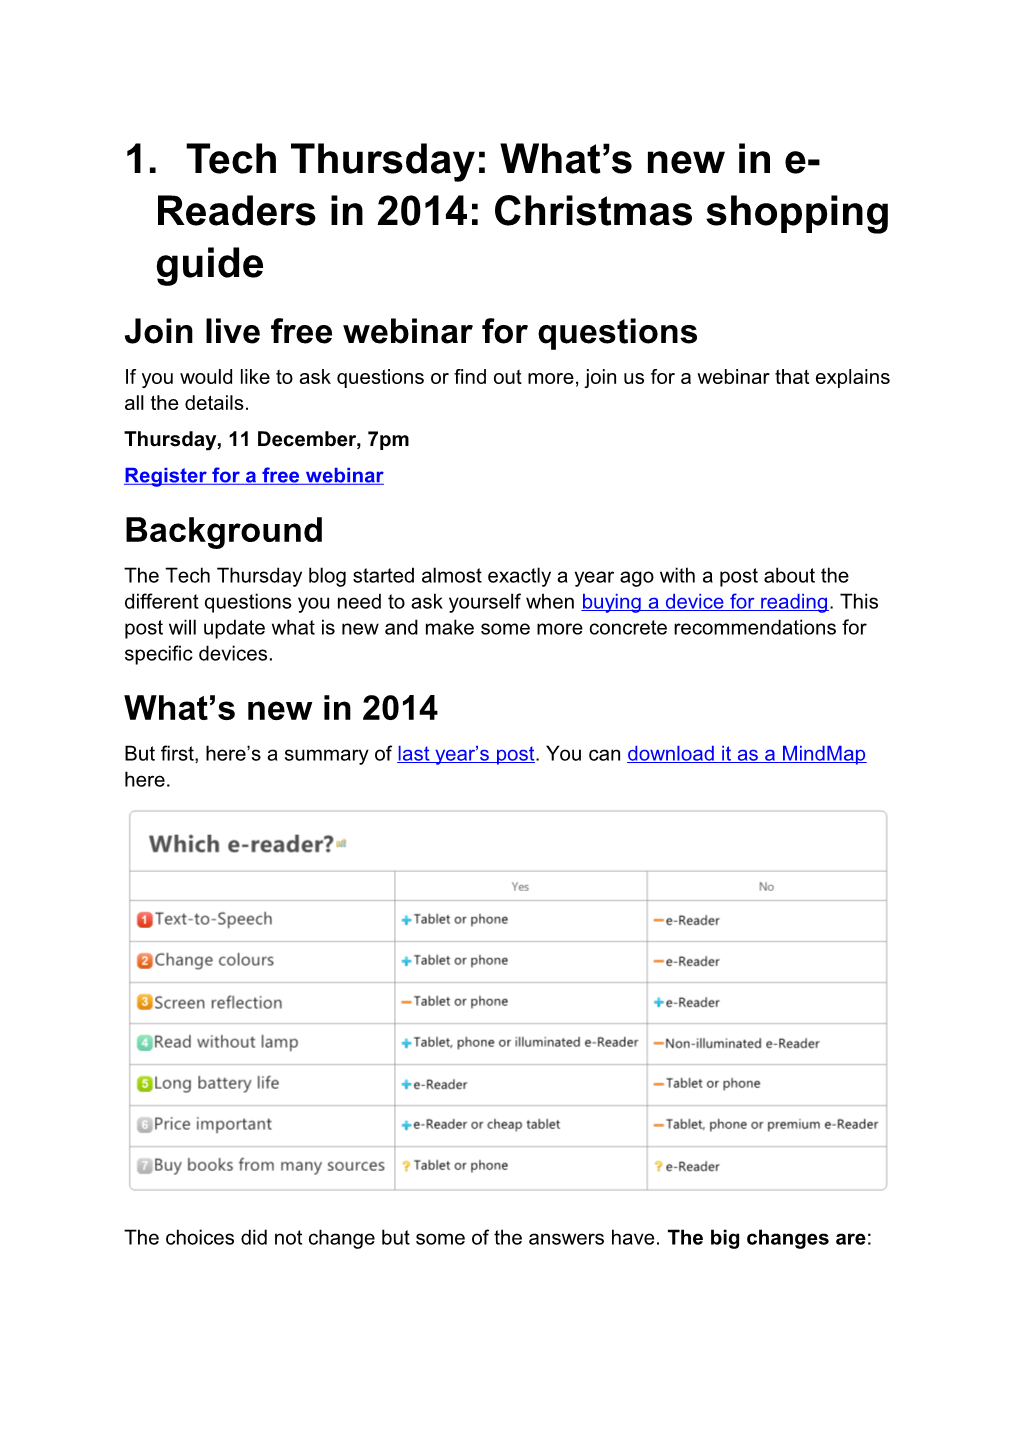 Tech Thursday: What S New in E-Readers in 2014: Christmas Shopping Guide